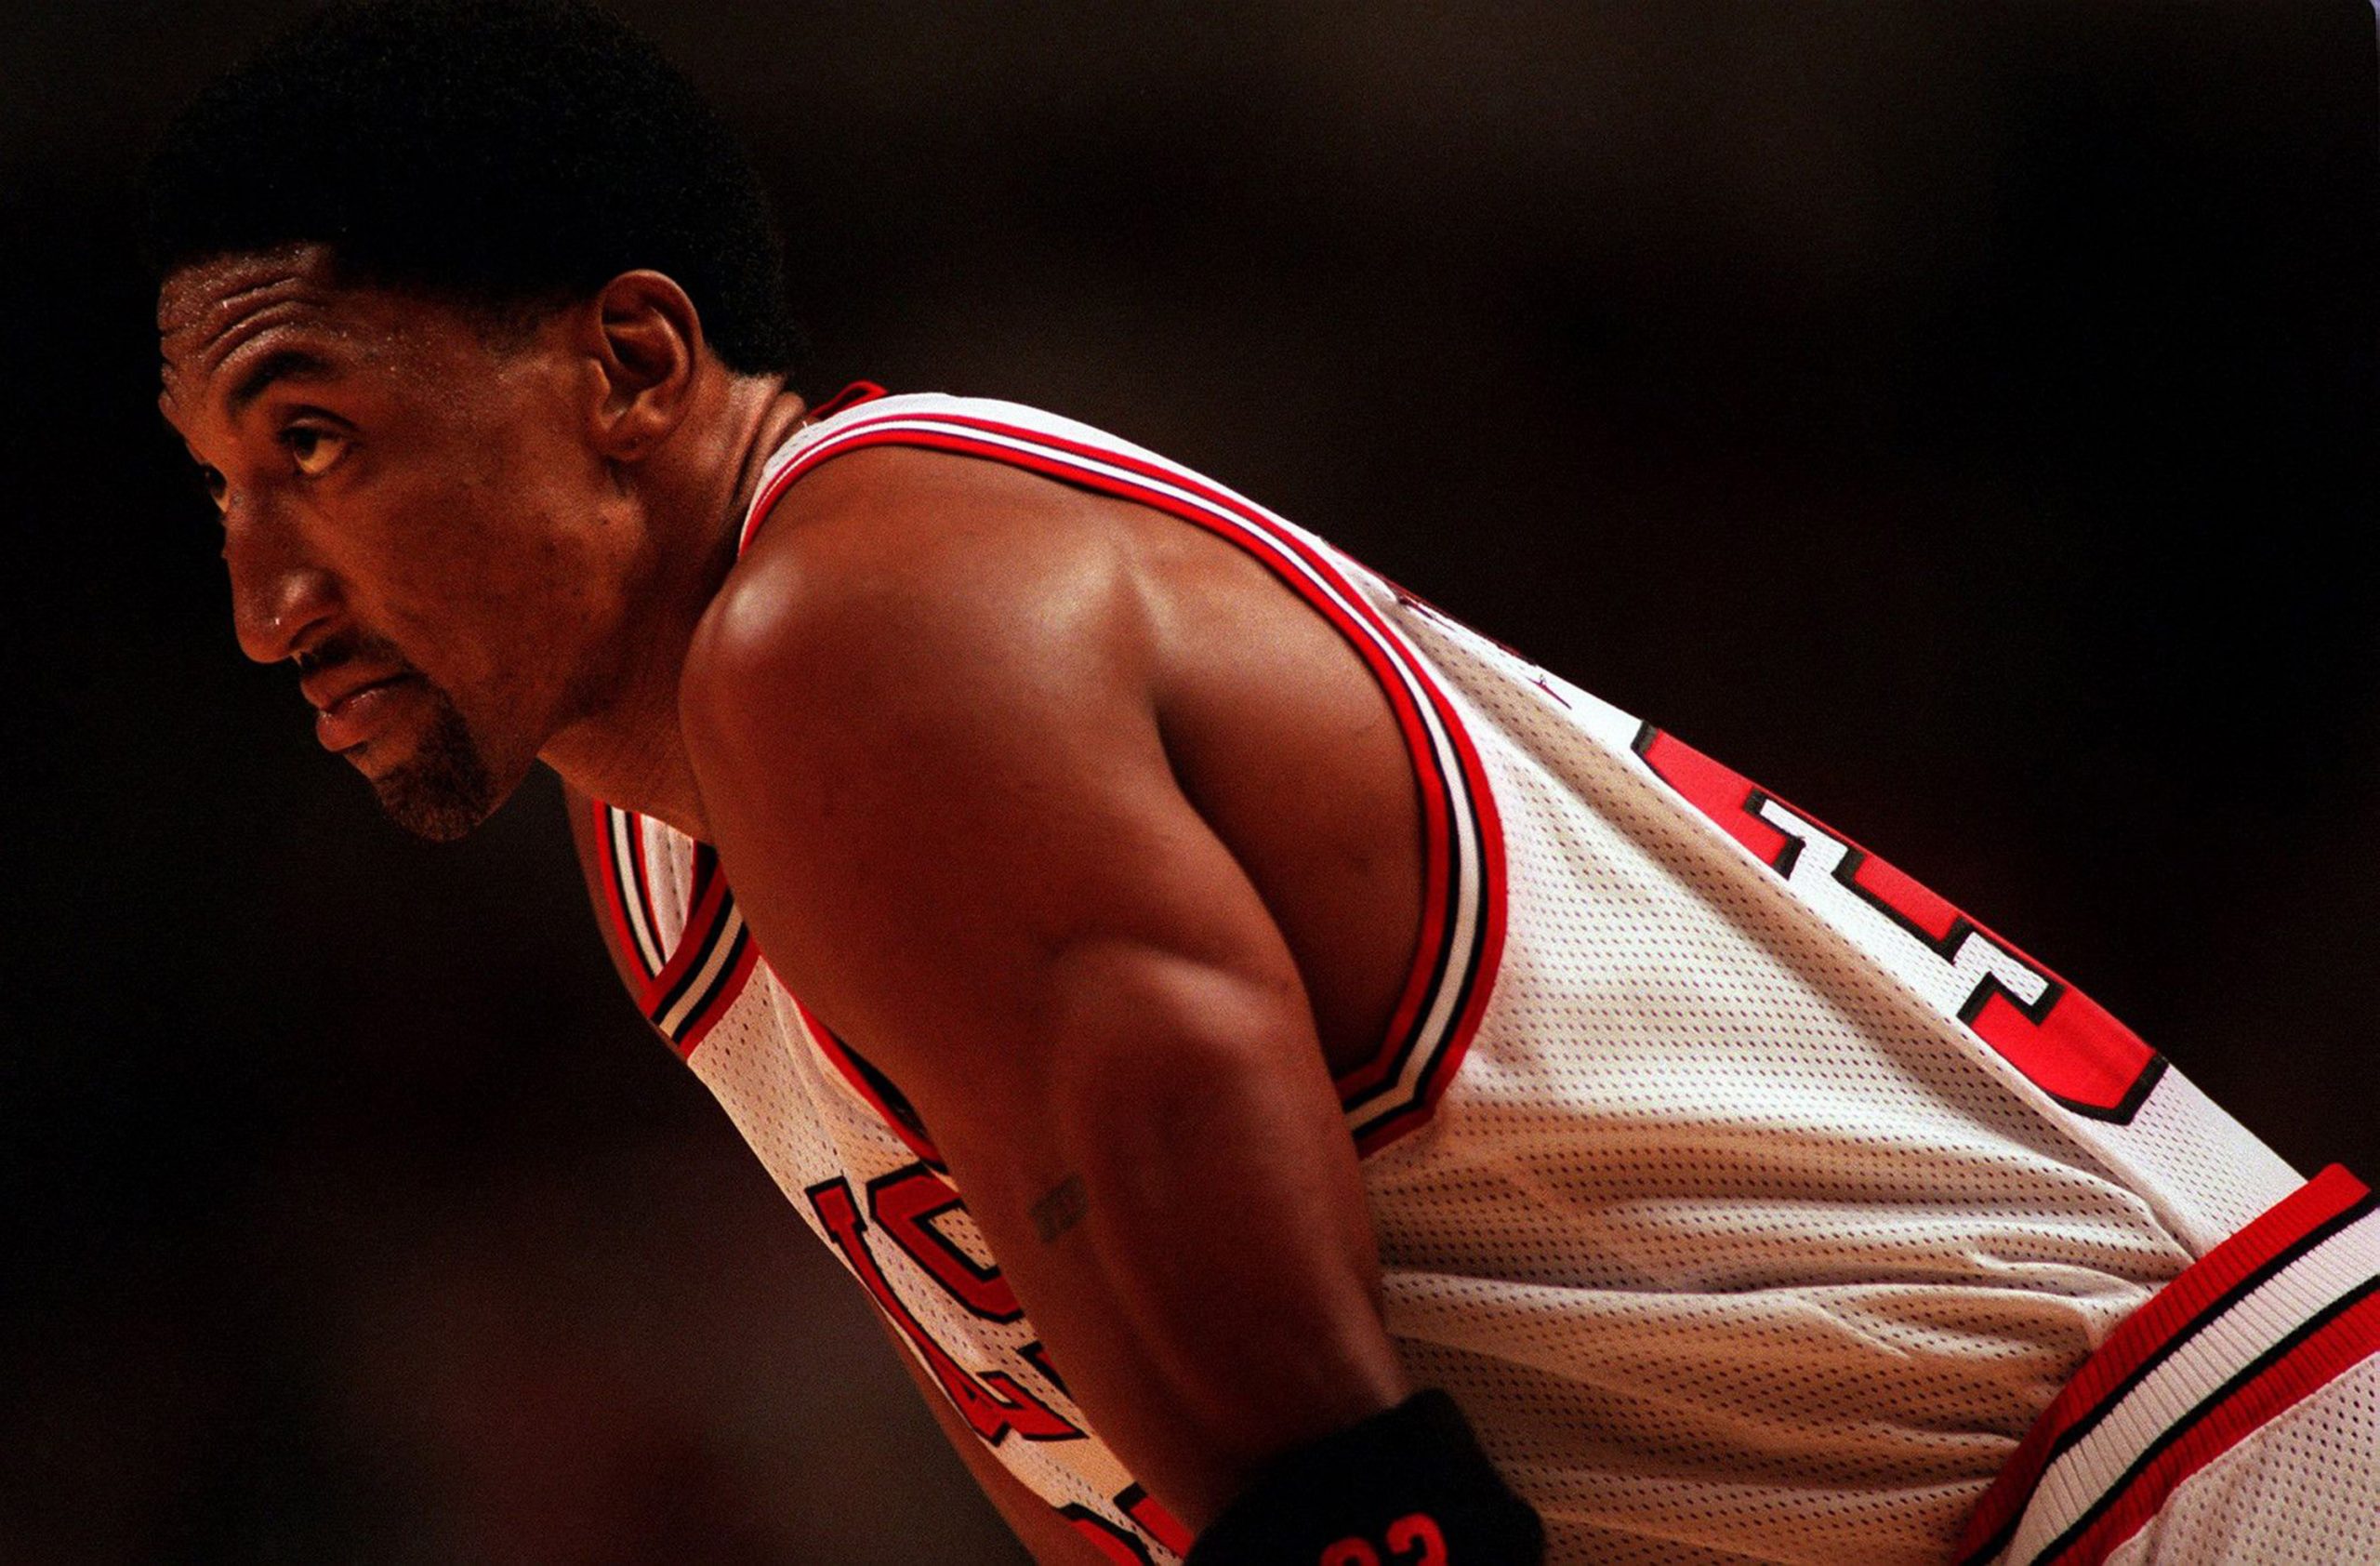 Scottie Pippen of the Chicago Bulls during a game on Feb. 15, 1998.